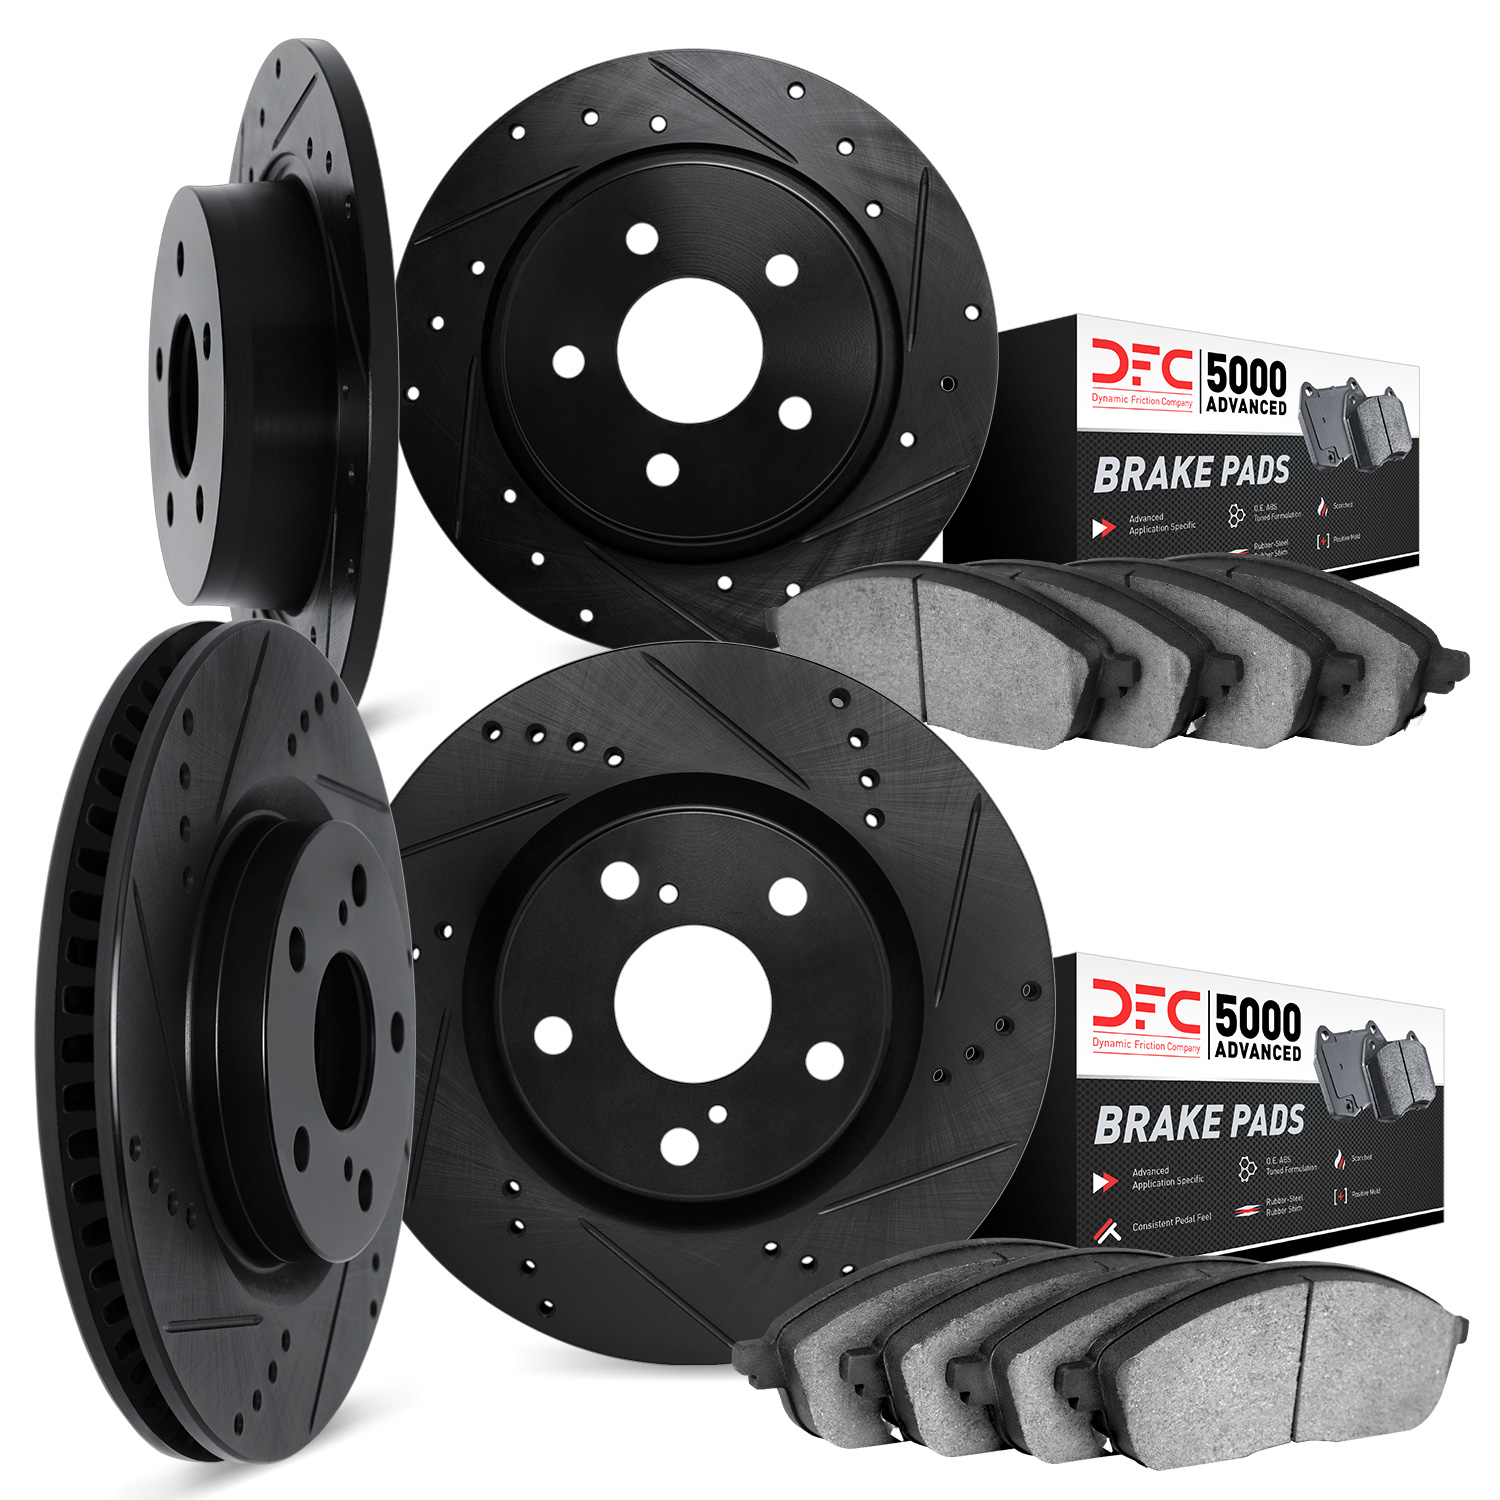 8504-67096 Drilled/Slotted Brake Rotors w/5000 Advanced Brake Pads Kit [Black], 2002-2006 Infiniti/Nissan, Position: Front and R